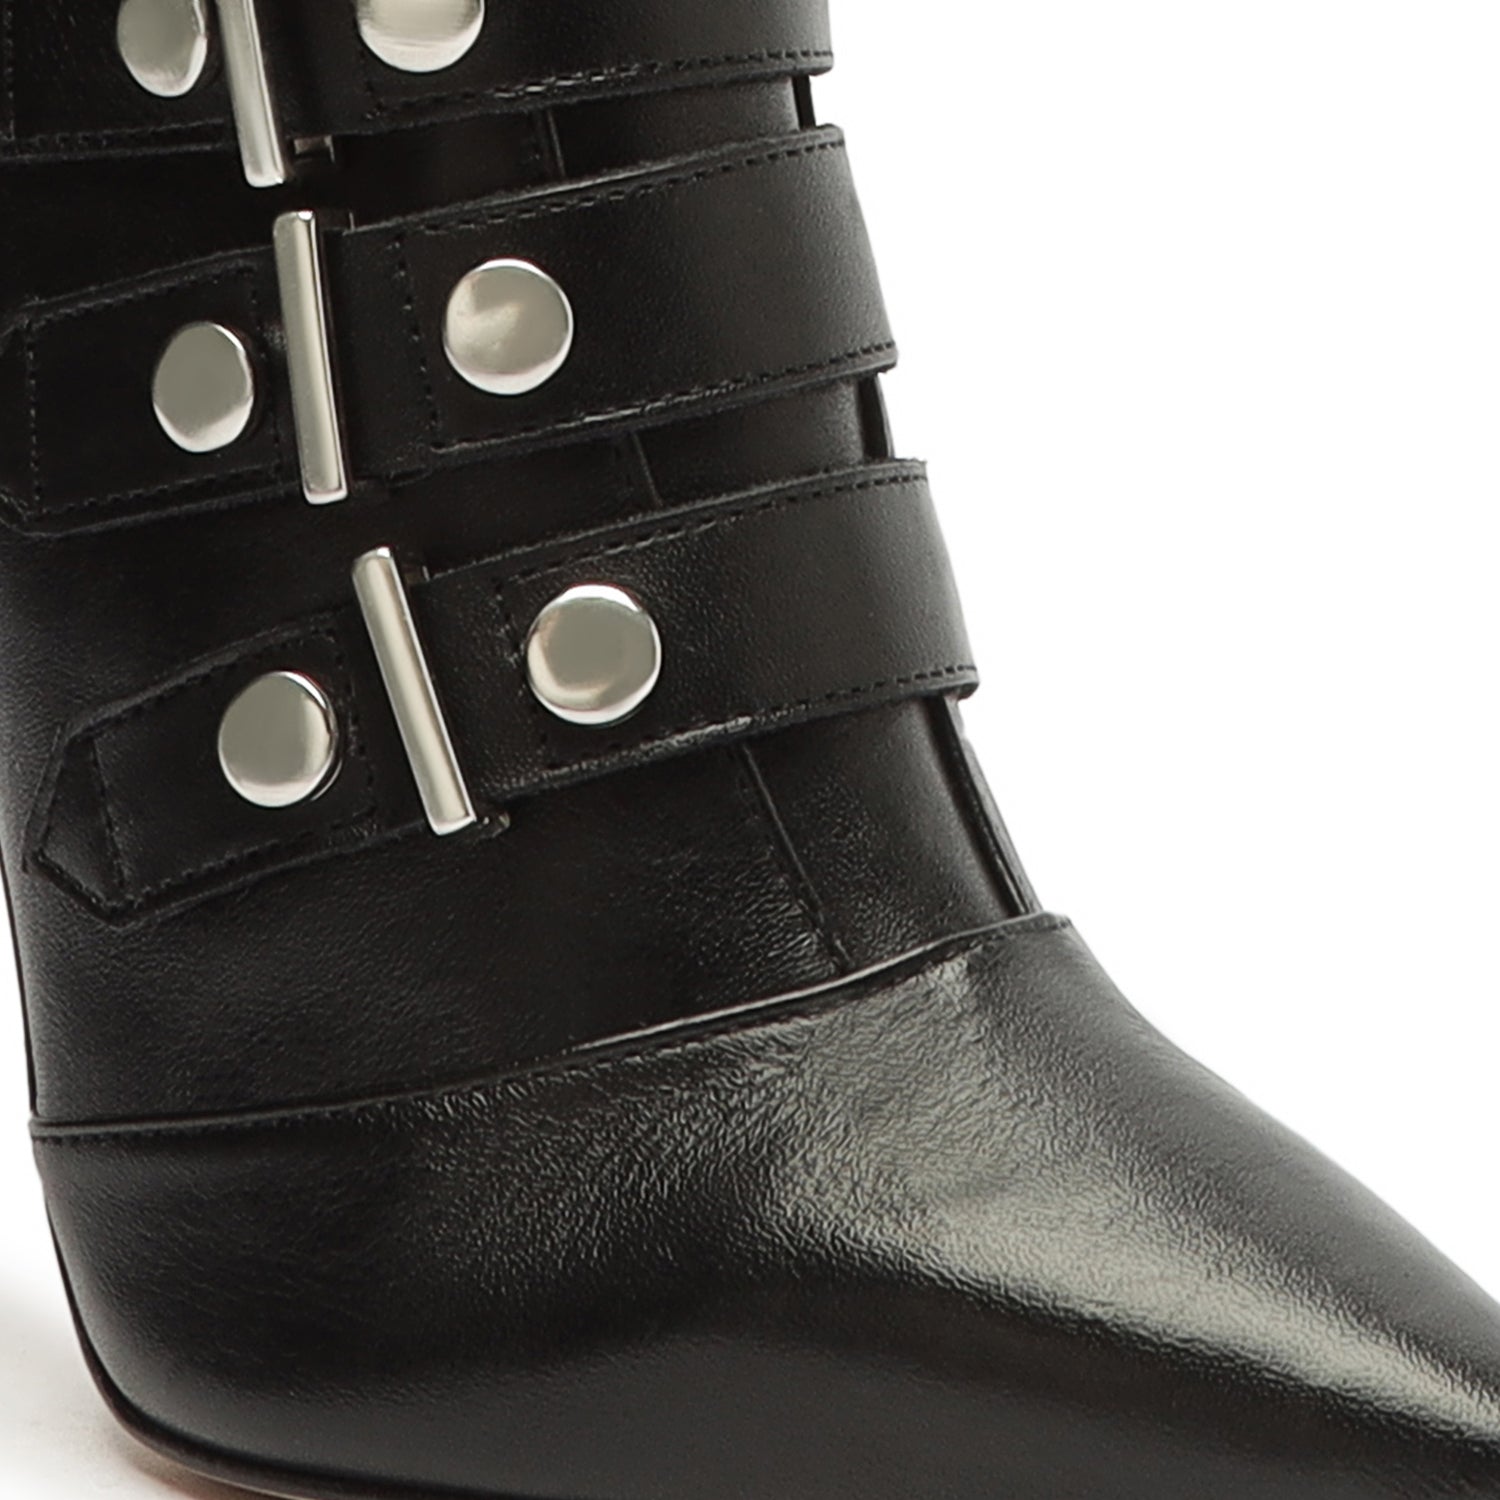 Tash Leather Boot Boots Open Stock    - Schutz Shoes